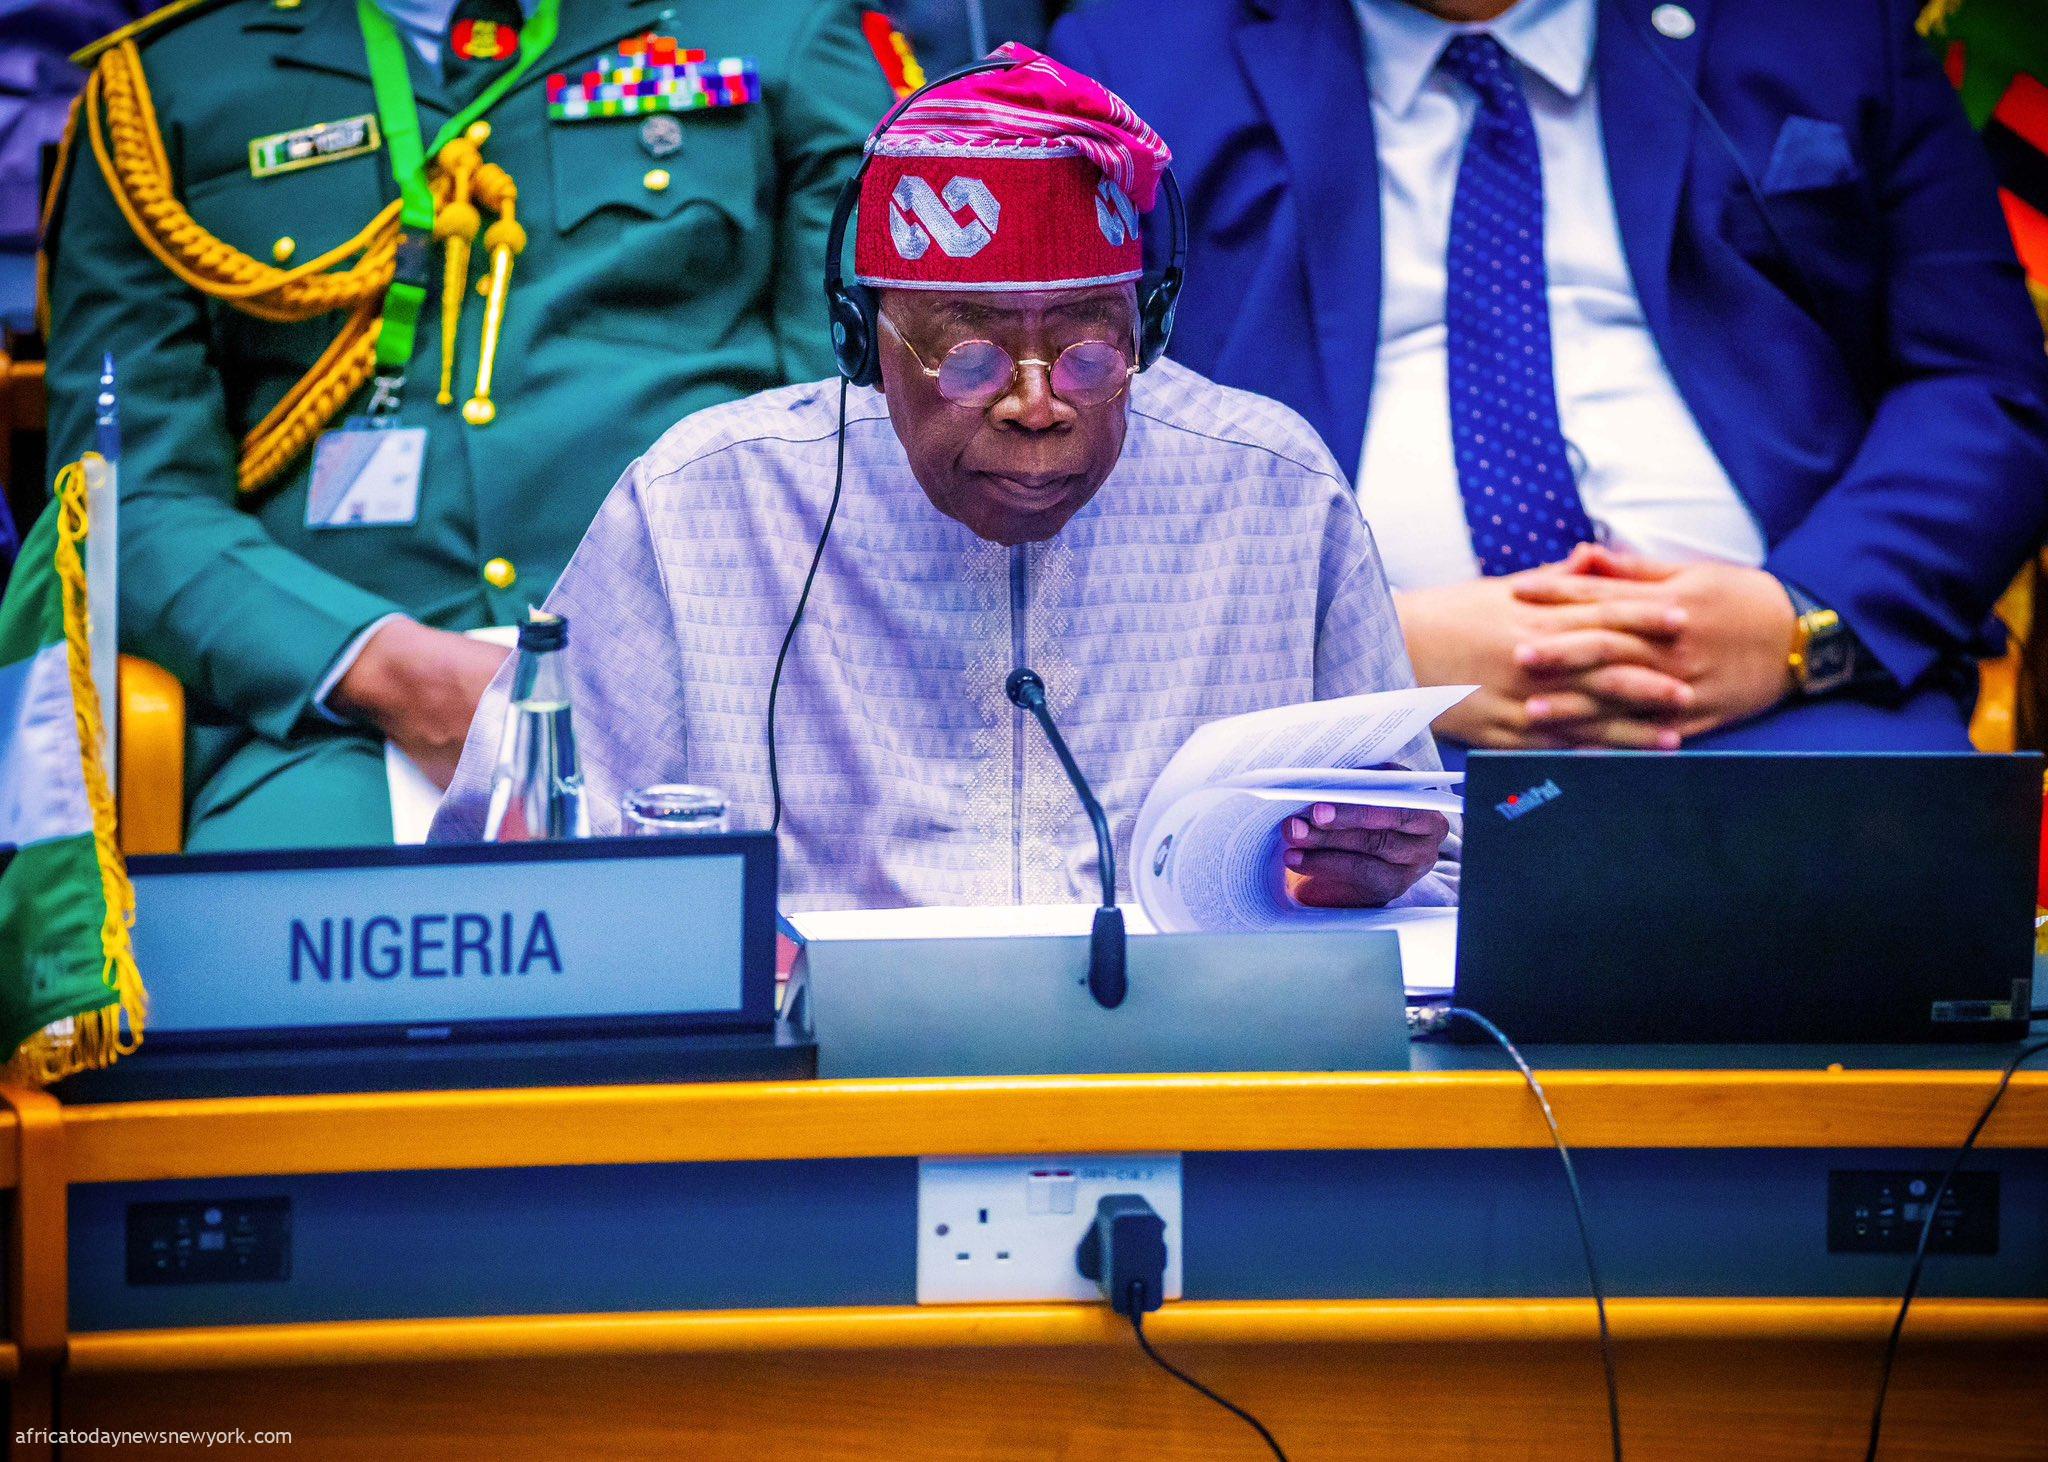 Plundering, Exploitation Of Africa Must End, Tinubu Declares